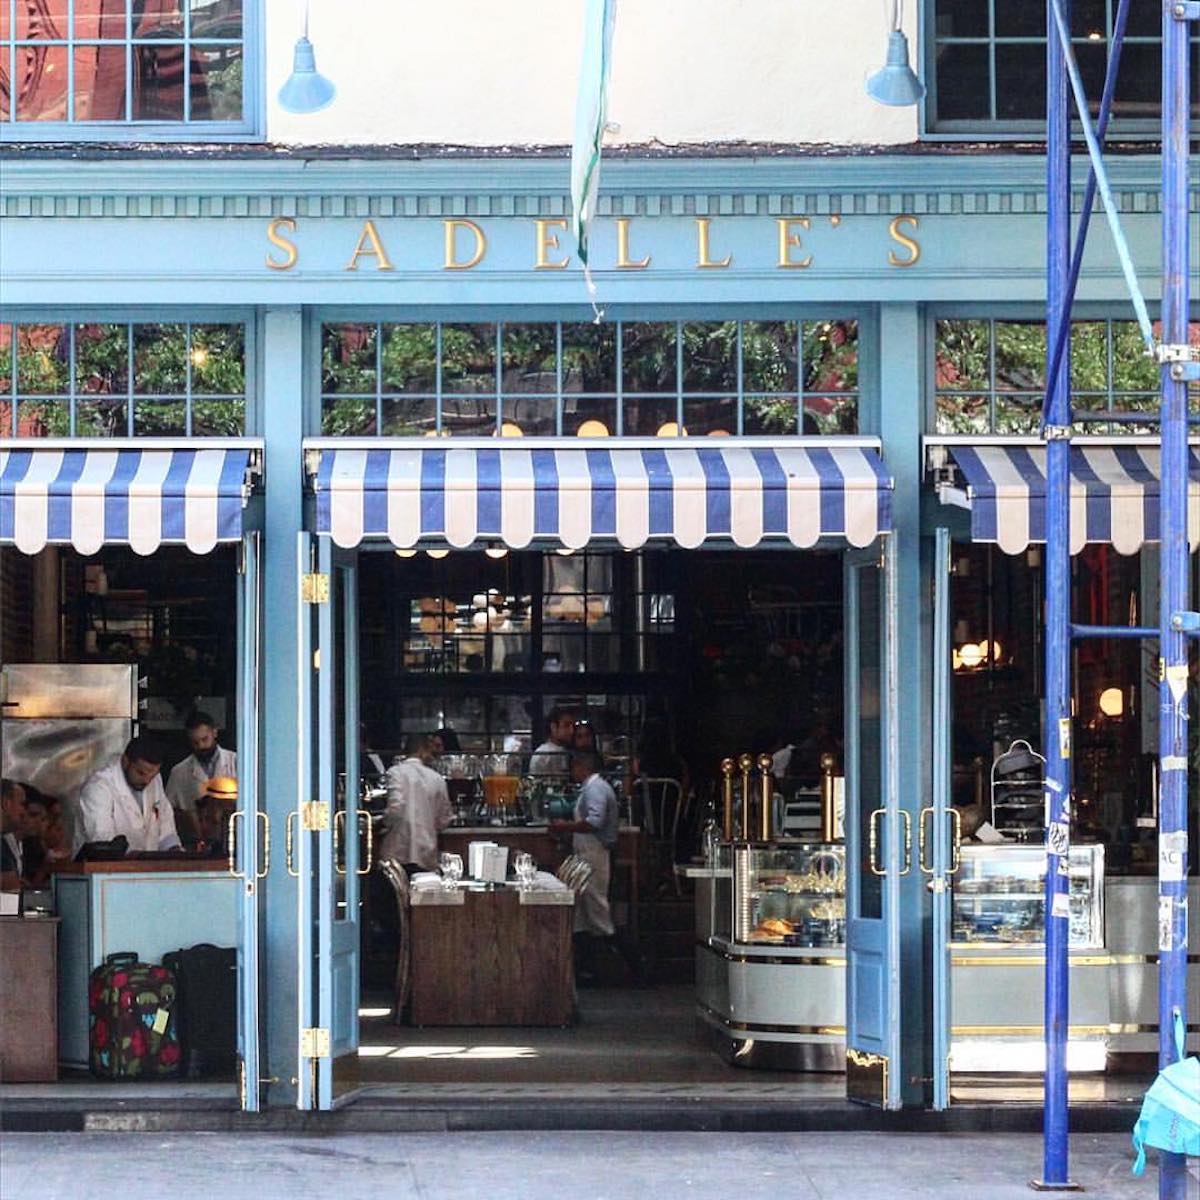 Exterior of Sadelle's in SoHo, New York, with blue paneling and a blue and white striped awning